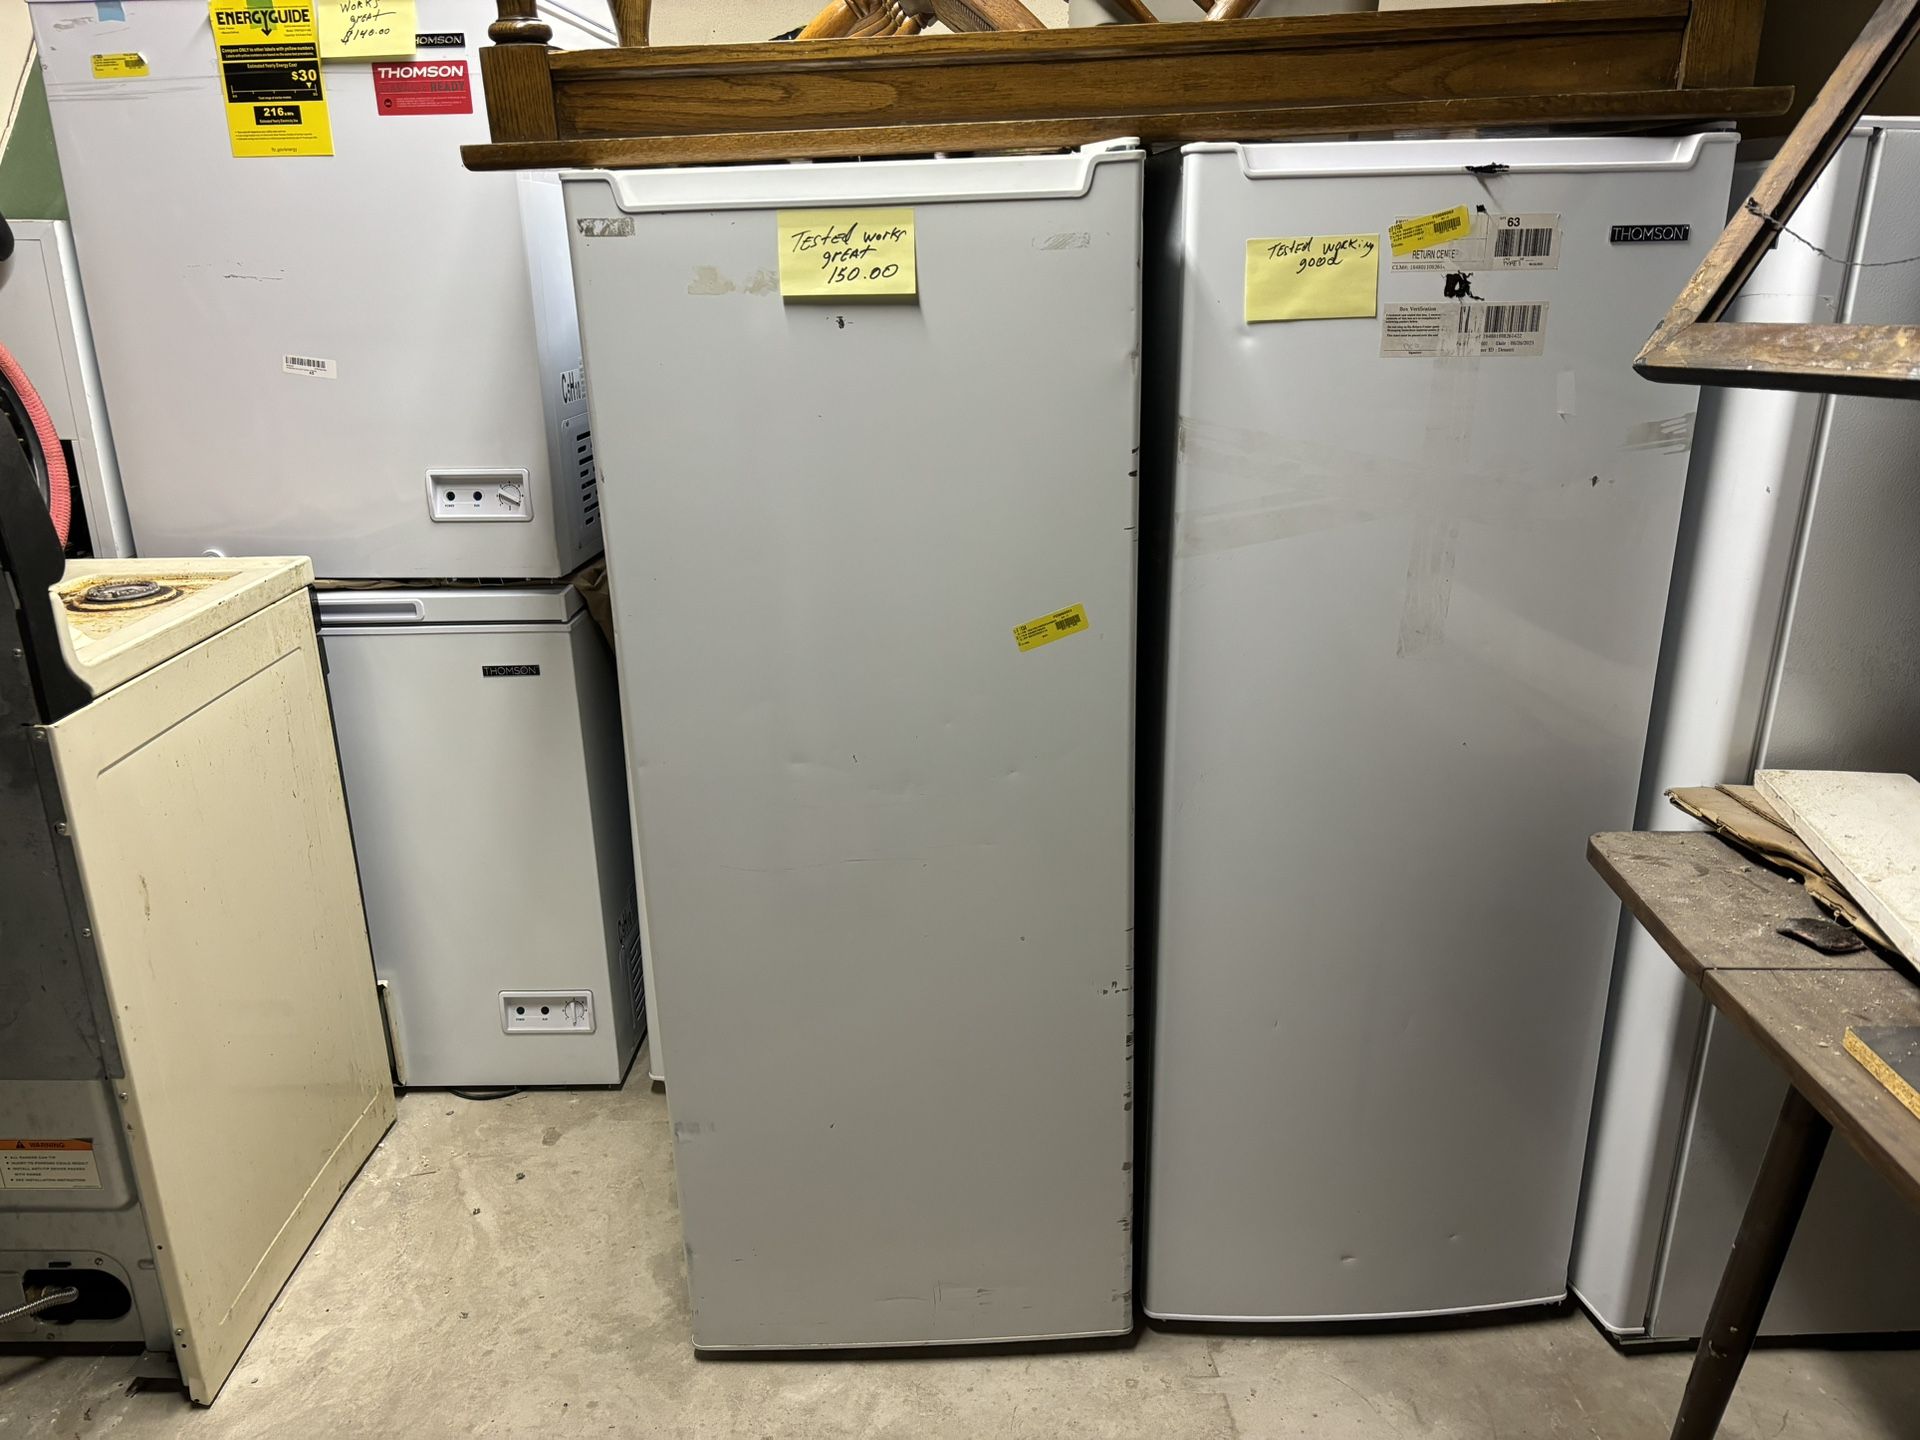 7.5 ft.³ Thompson new upright freezers so I’m having a dent or maybe a scratch or two but all are new all been tested works great $25 delivery Milwaee